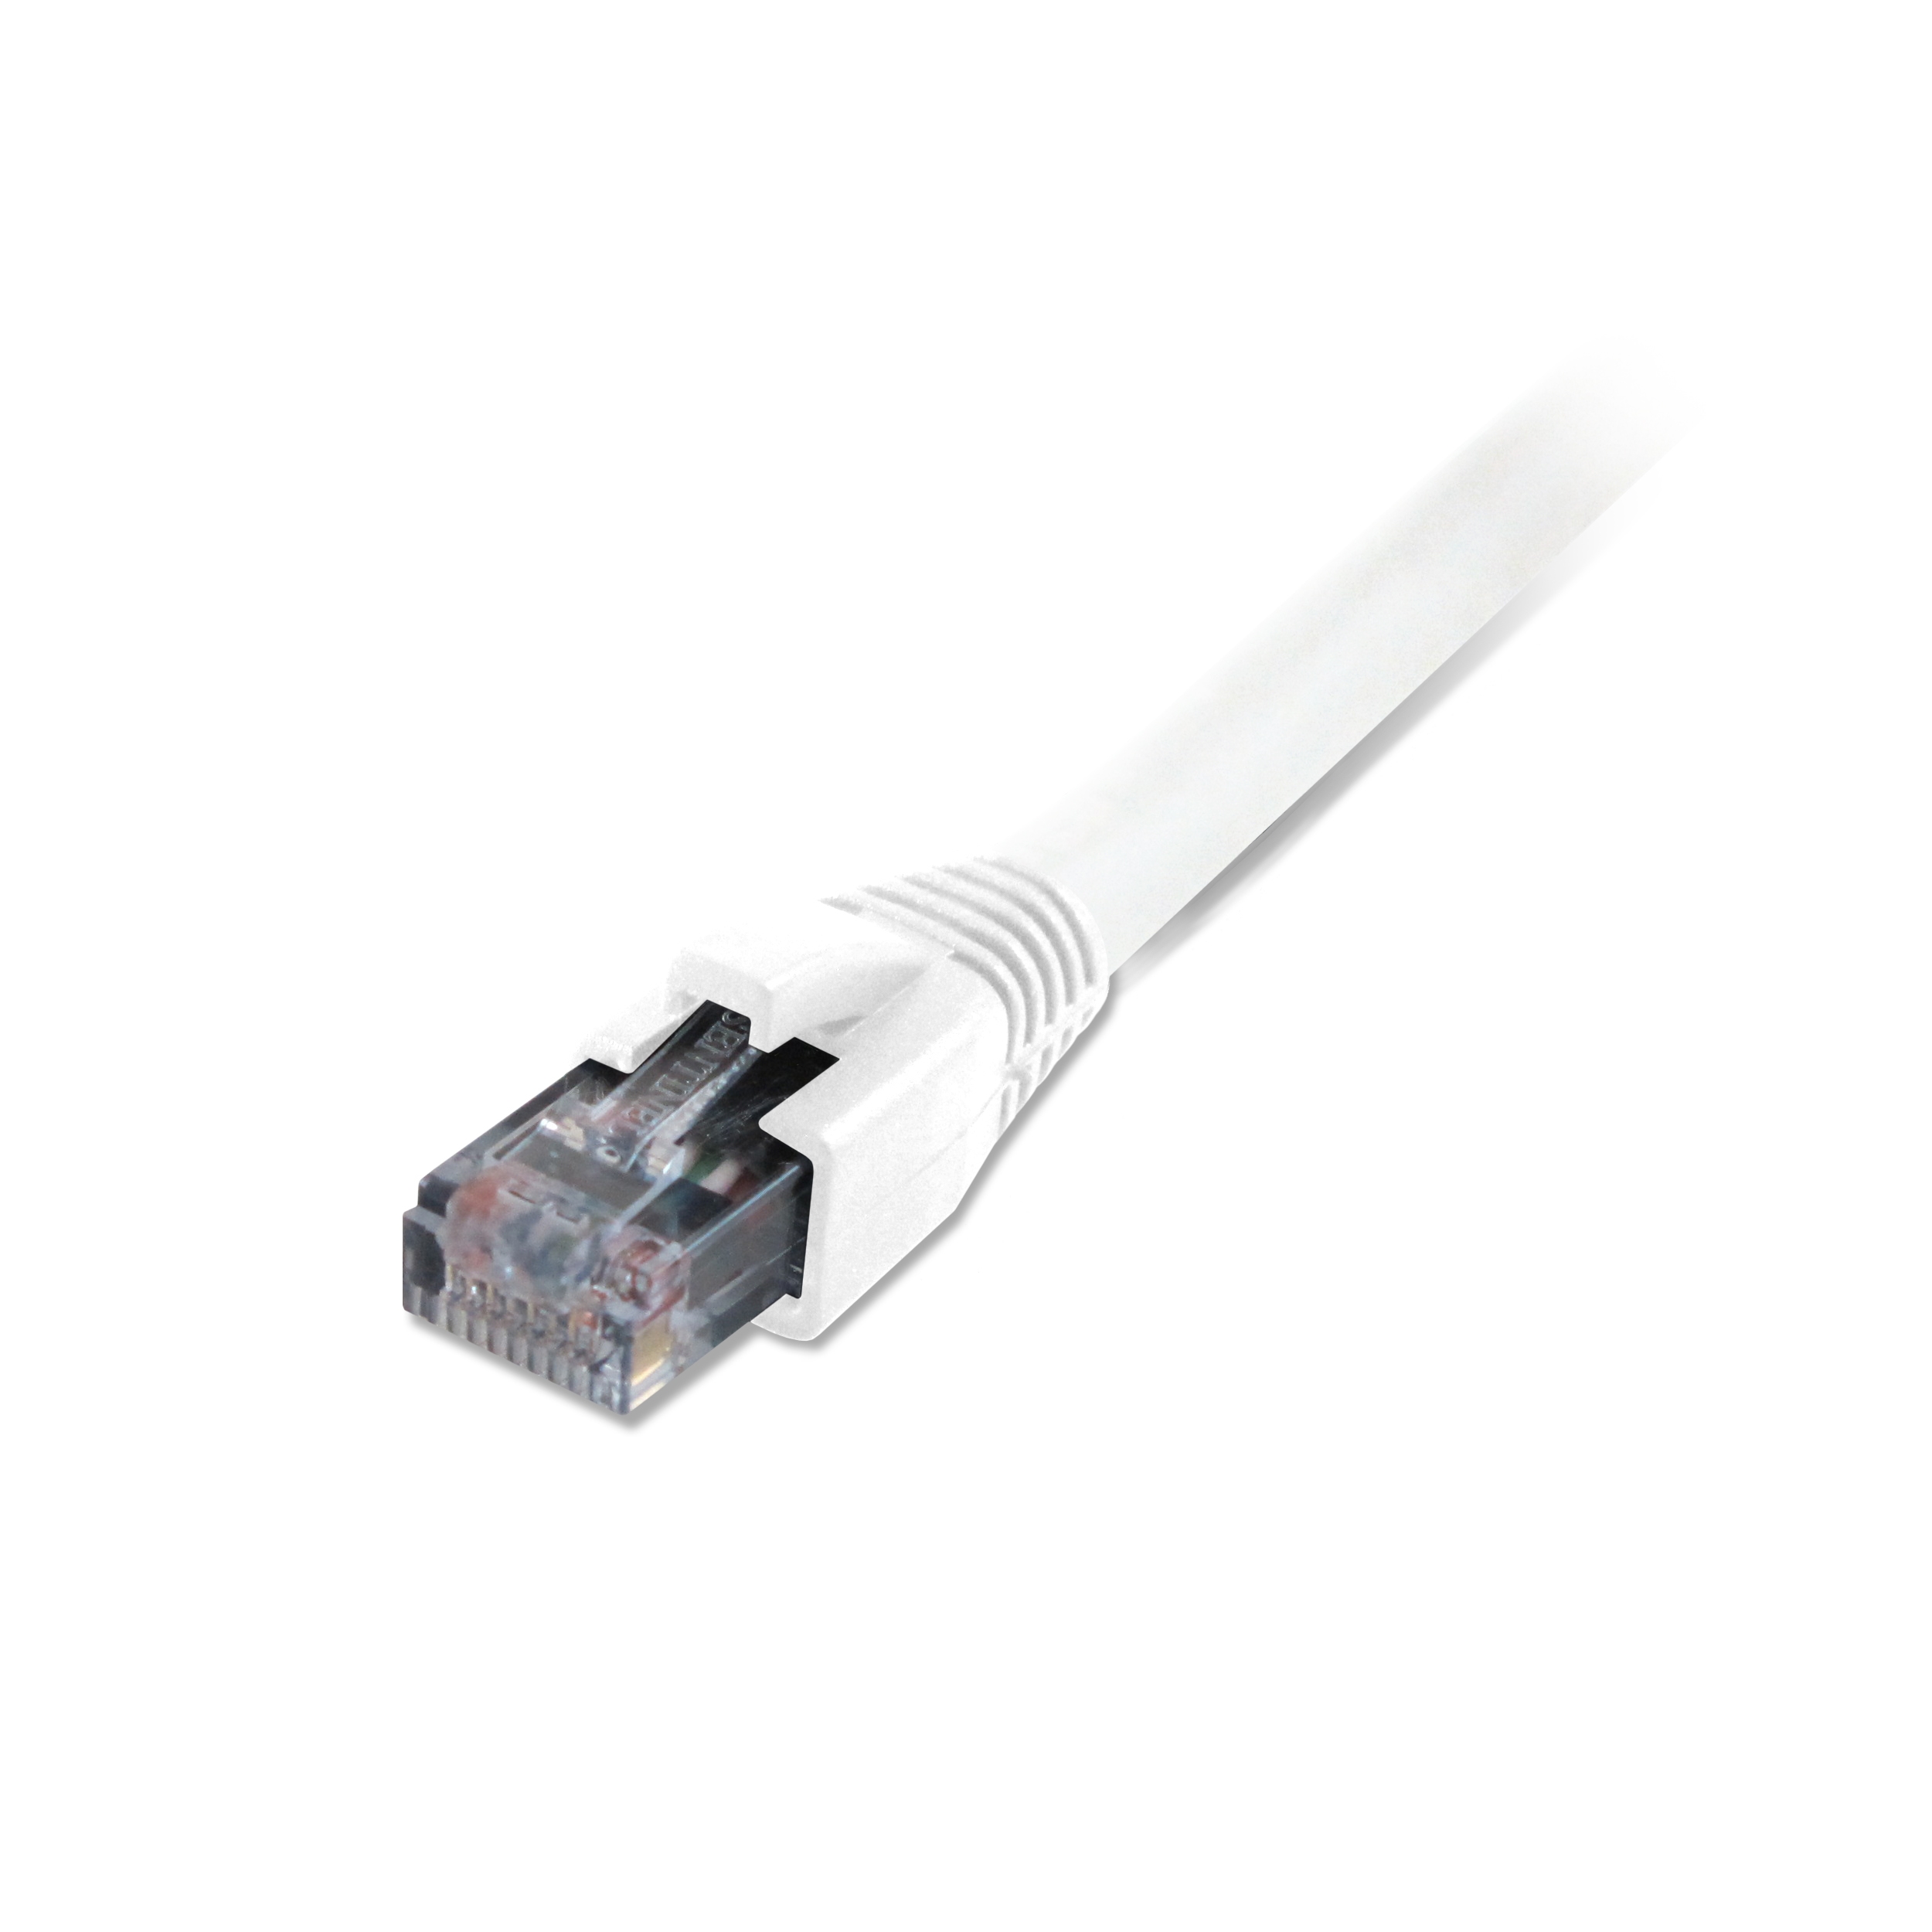 Comprehensive CAT5-350-5WHT Cat5e 350 Mhz Snagless Patch Cable 5ft White